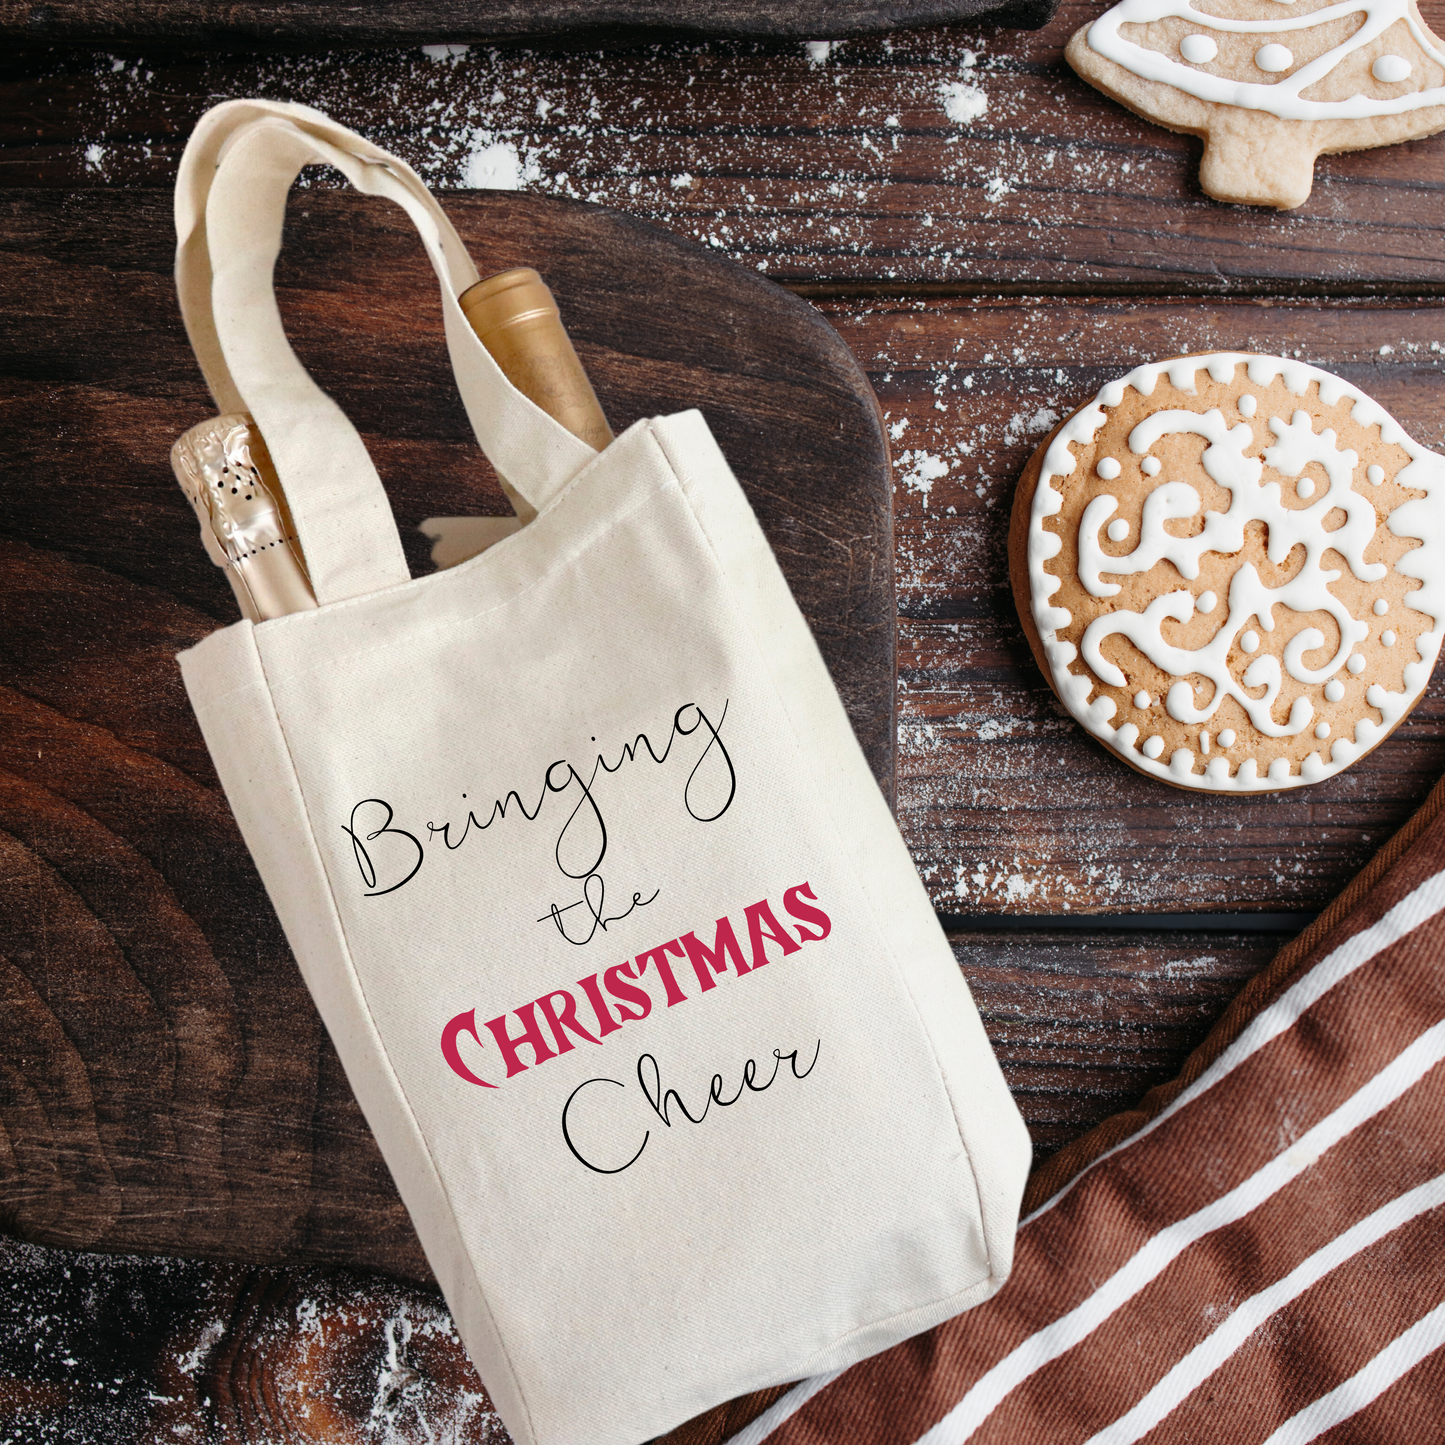 Bringing the Christmas Cheer (Double Wine Tote Bag)